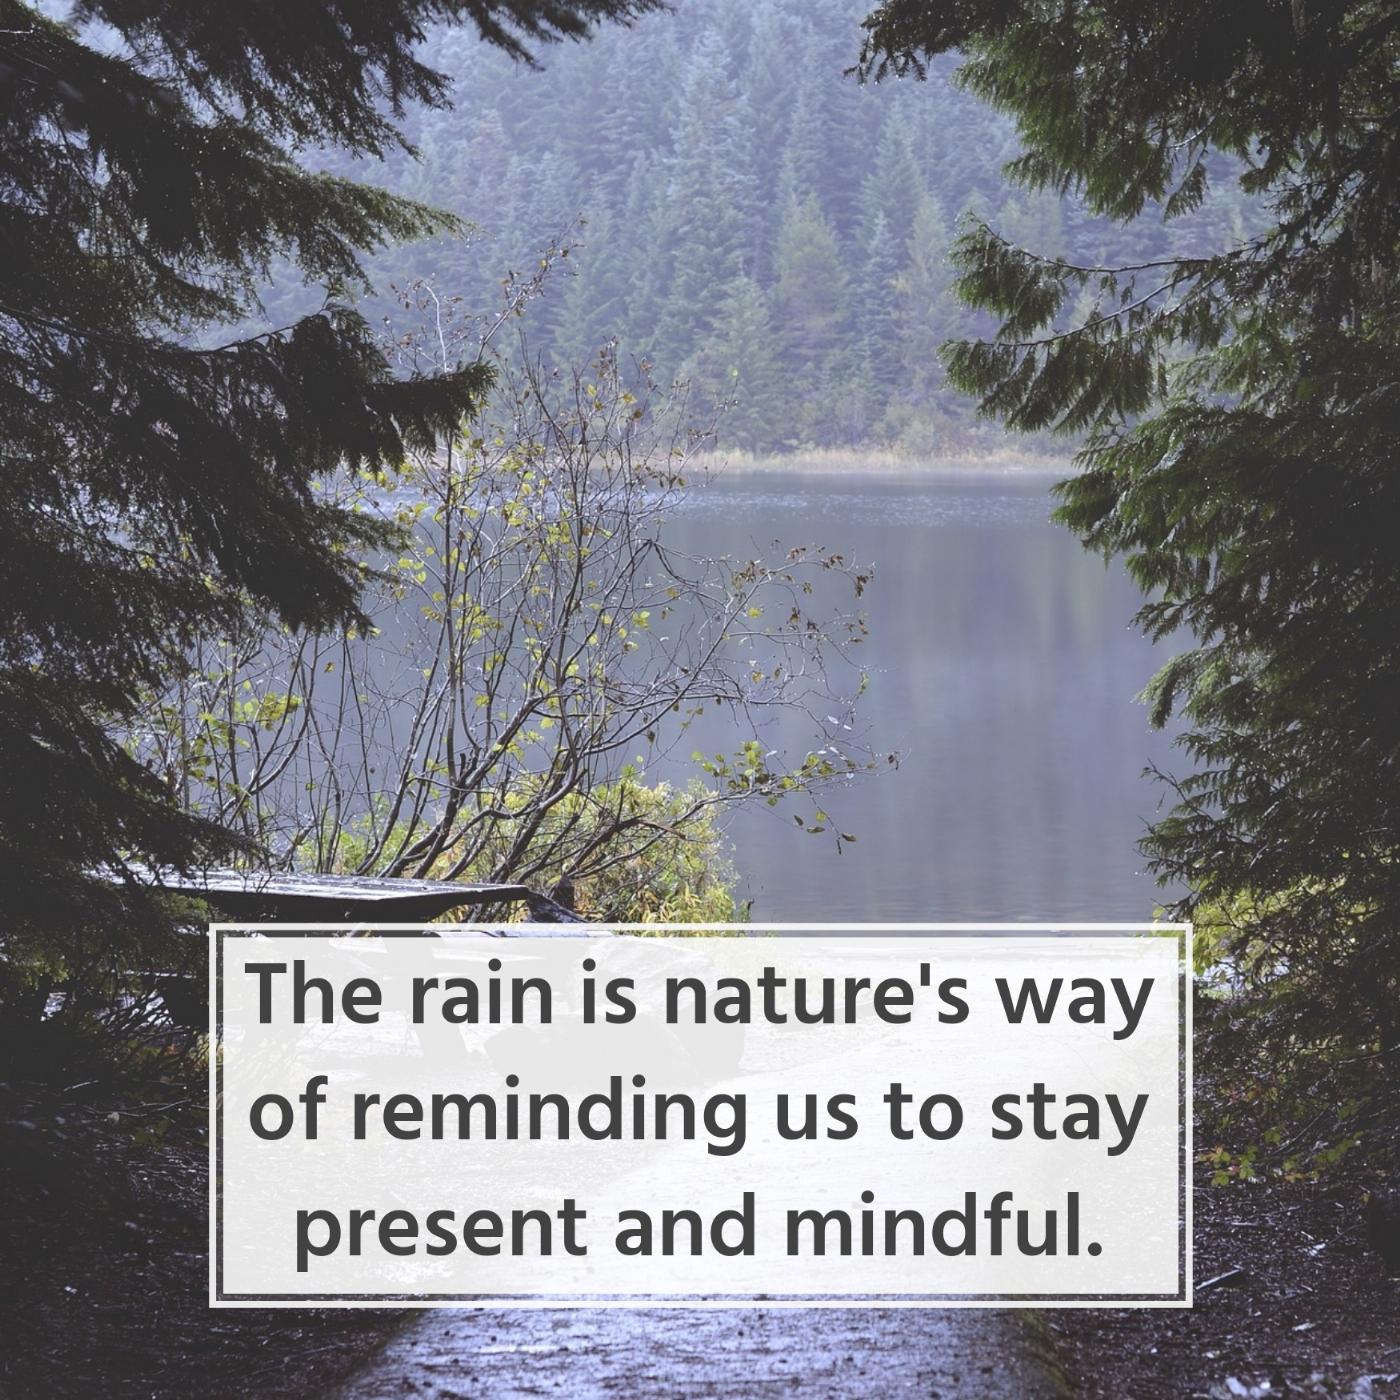 The rain is nature's way of reminding us to stay present and mindful